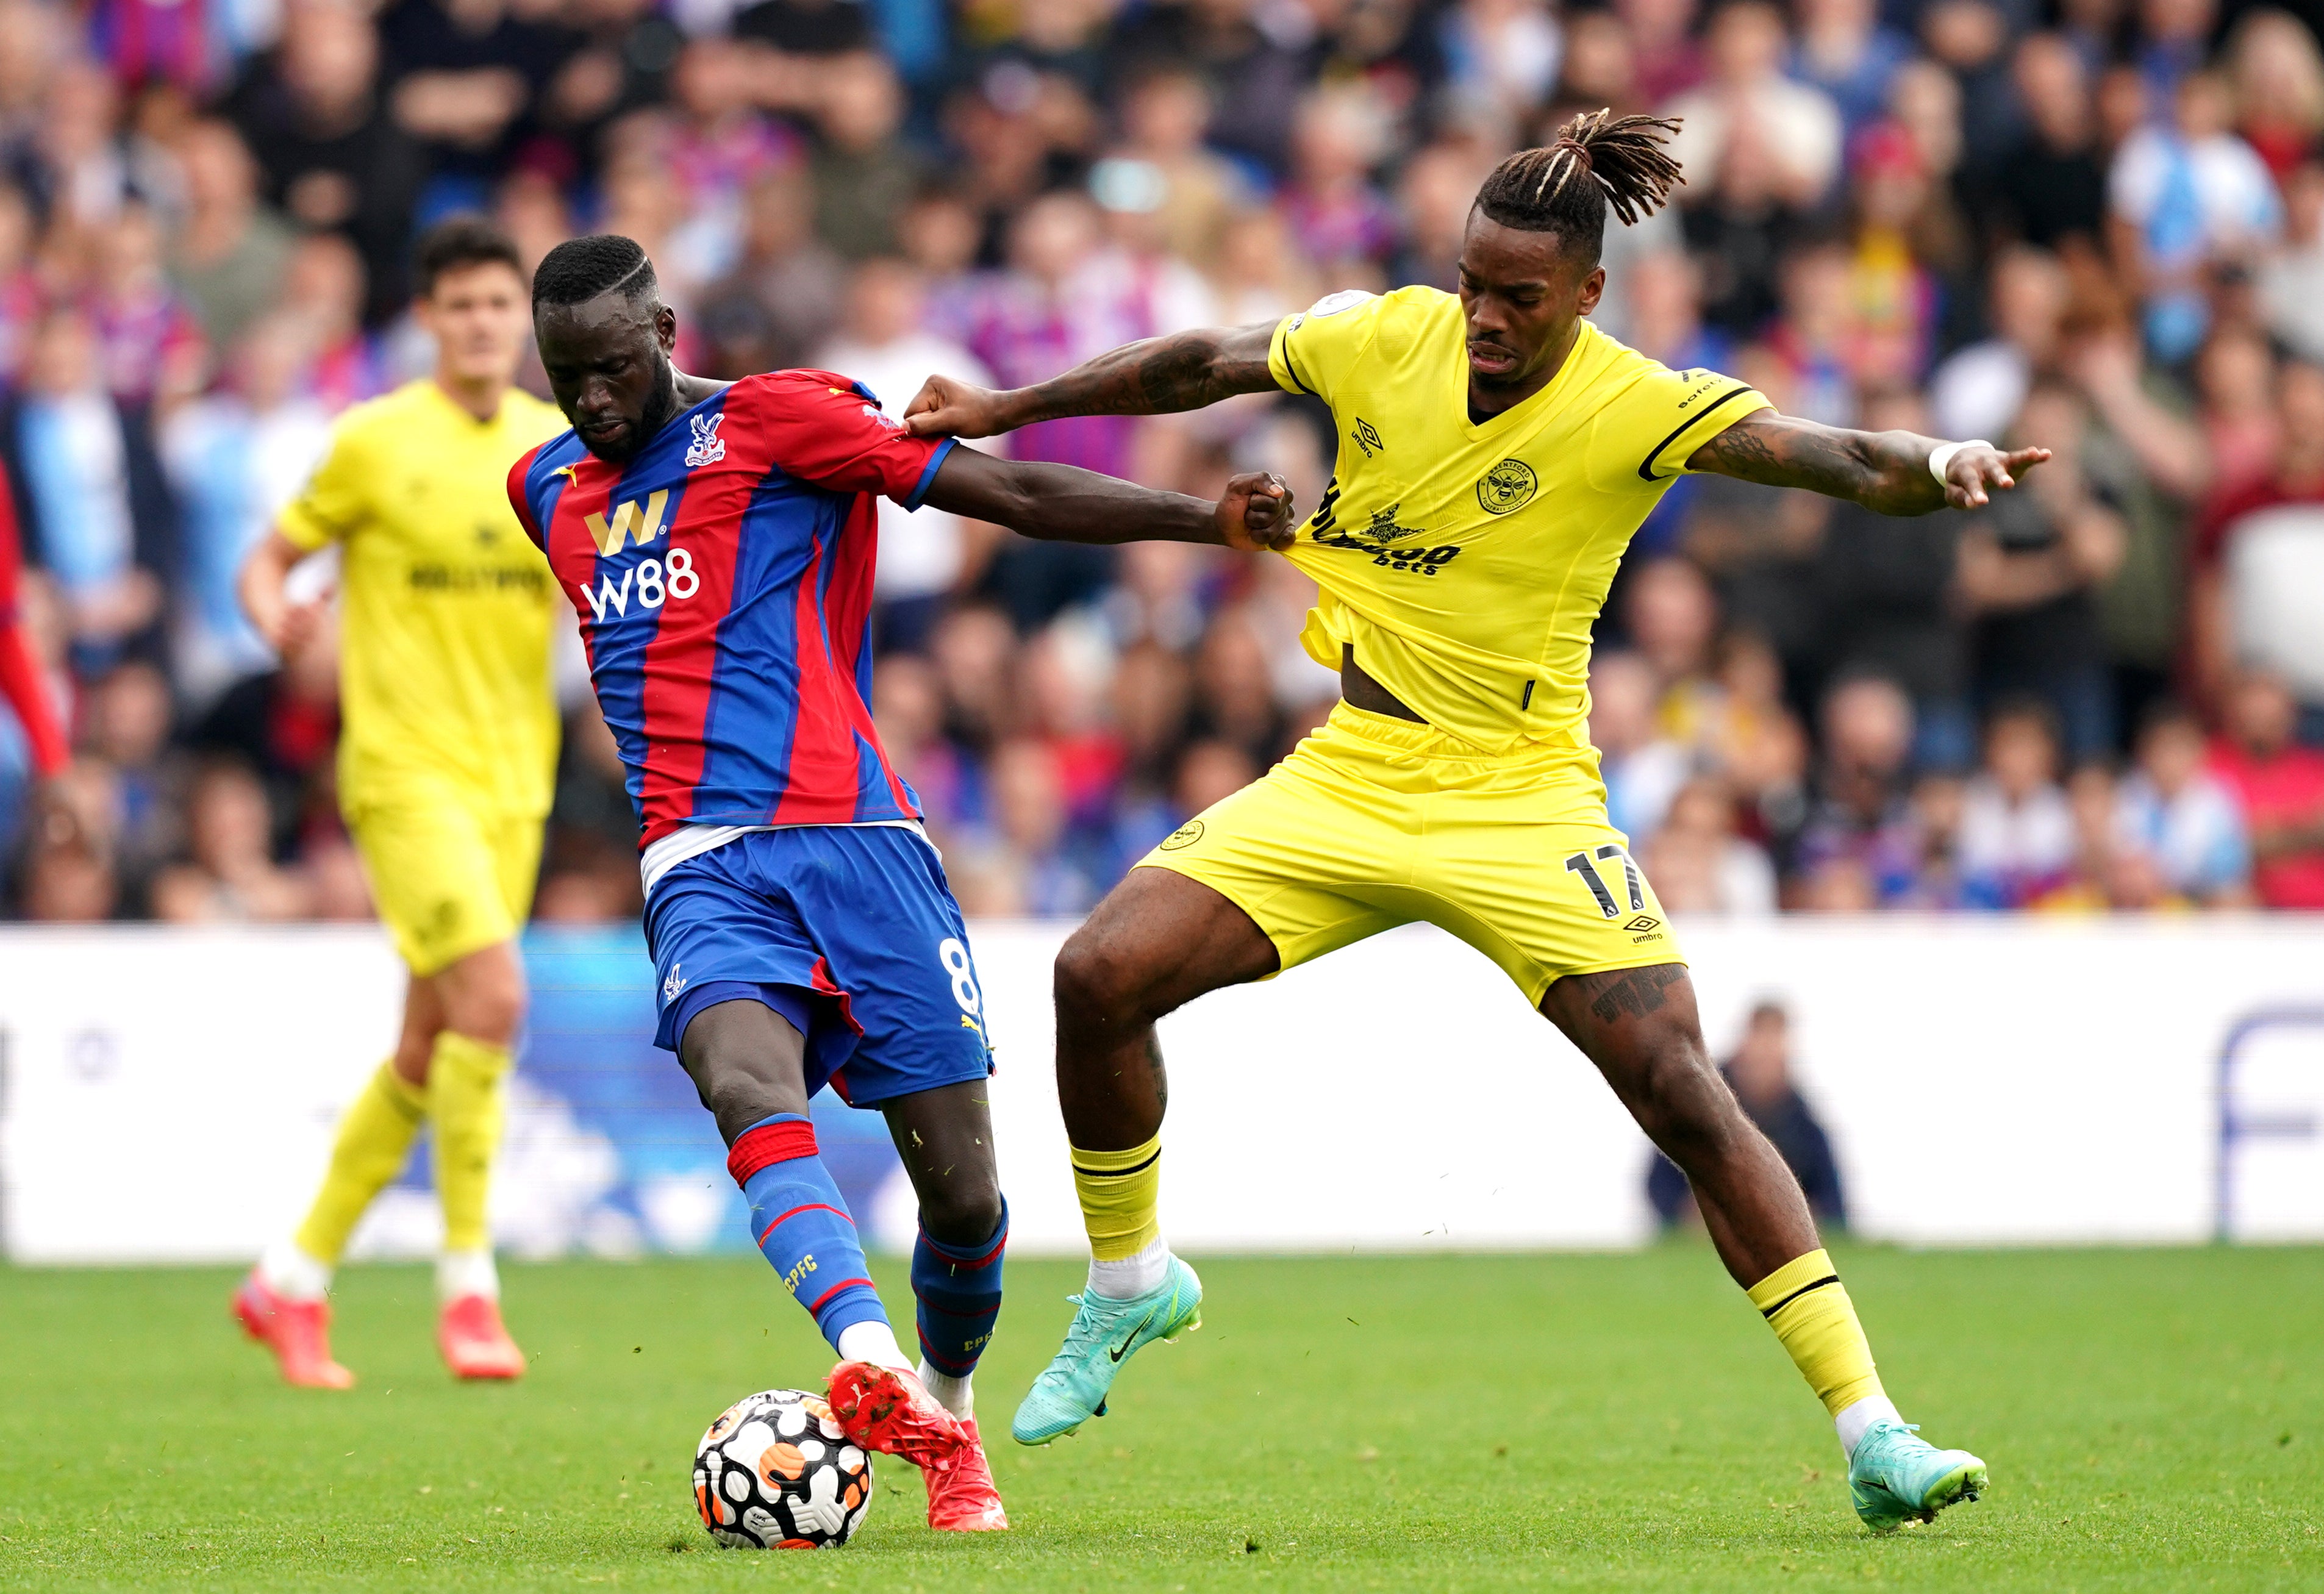 Crystal Palace’s Cheikhou Kouyate (left) and Brentford’s Ivan Toney battle for the ball (Dominic Lipinski/PA)